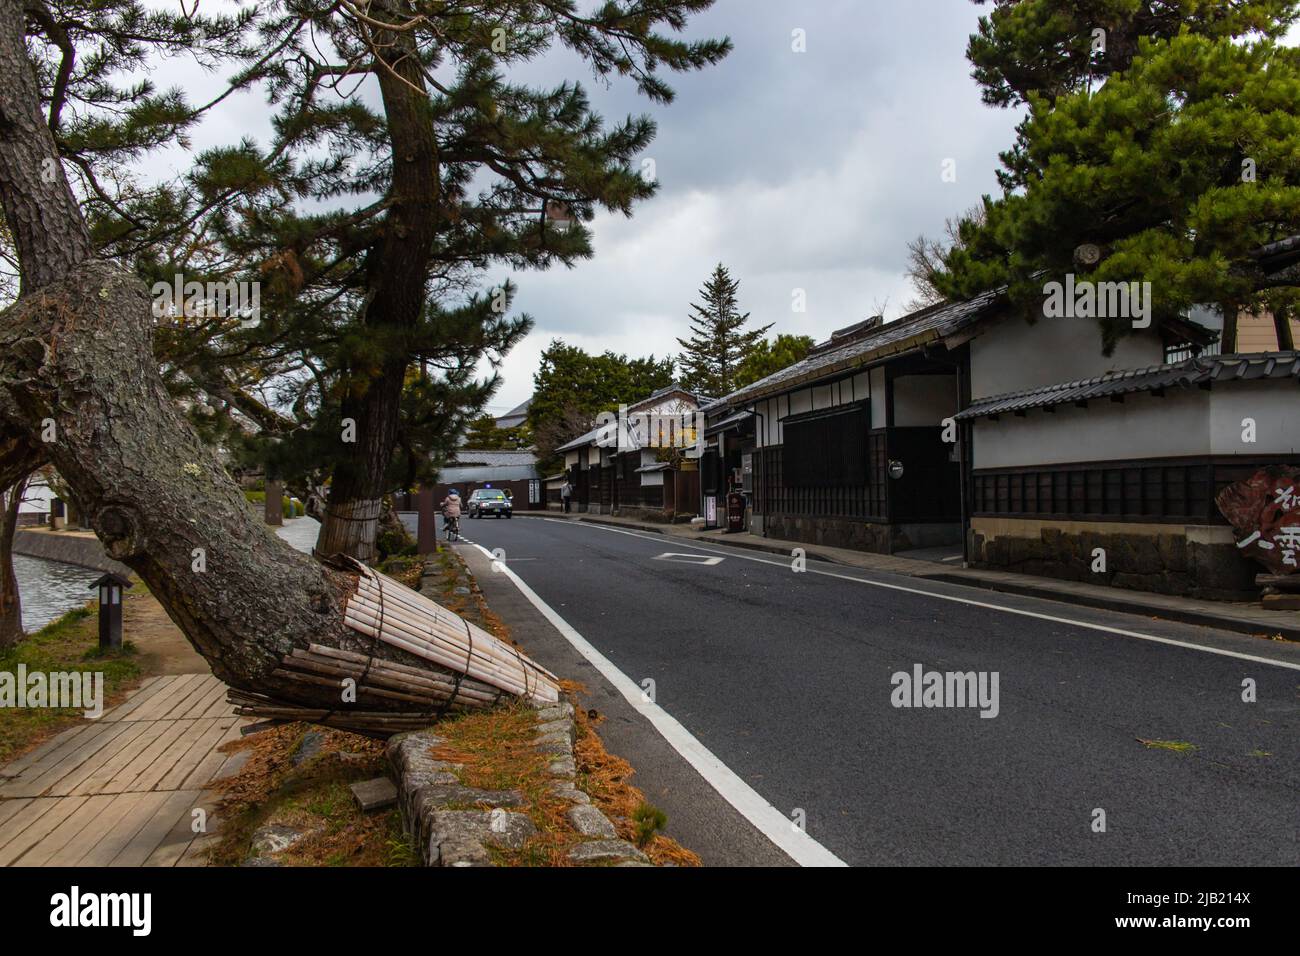 Matsue, Shimane, JAPAN - Dec 1 2021 : The Shiomi Nawate Street in cloudy day. It is a 500 meters long street along the Matsue castle moat that is line Stock Photo